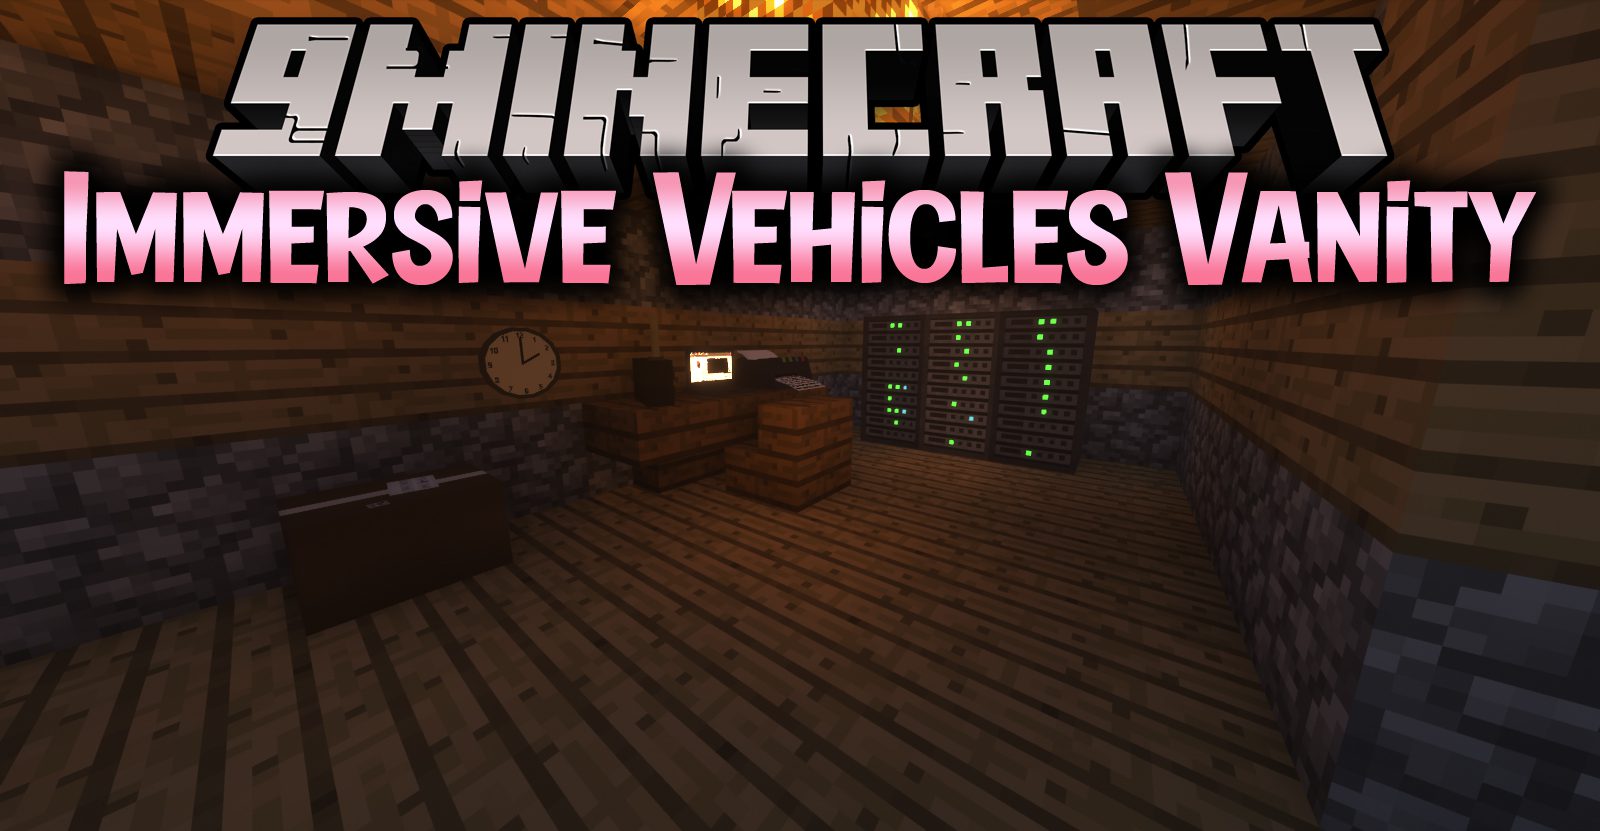 Immersive Vehicles Vanity Mod (1.16.5, 1.12.2) - The Vehicles Looked Funny 1